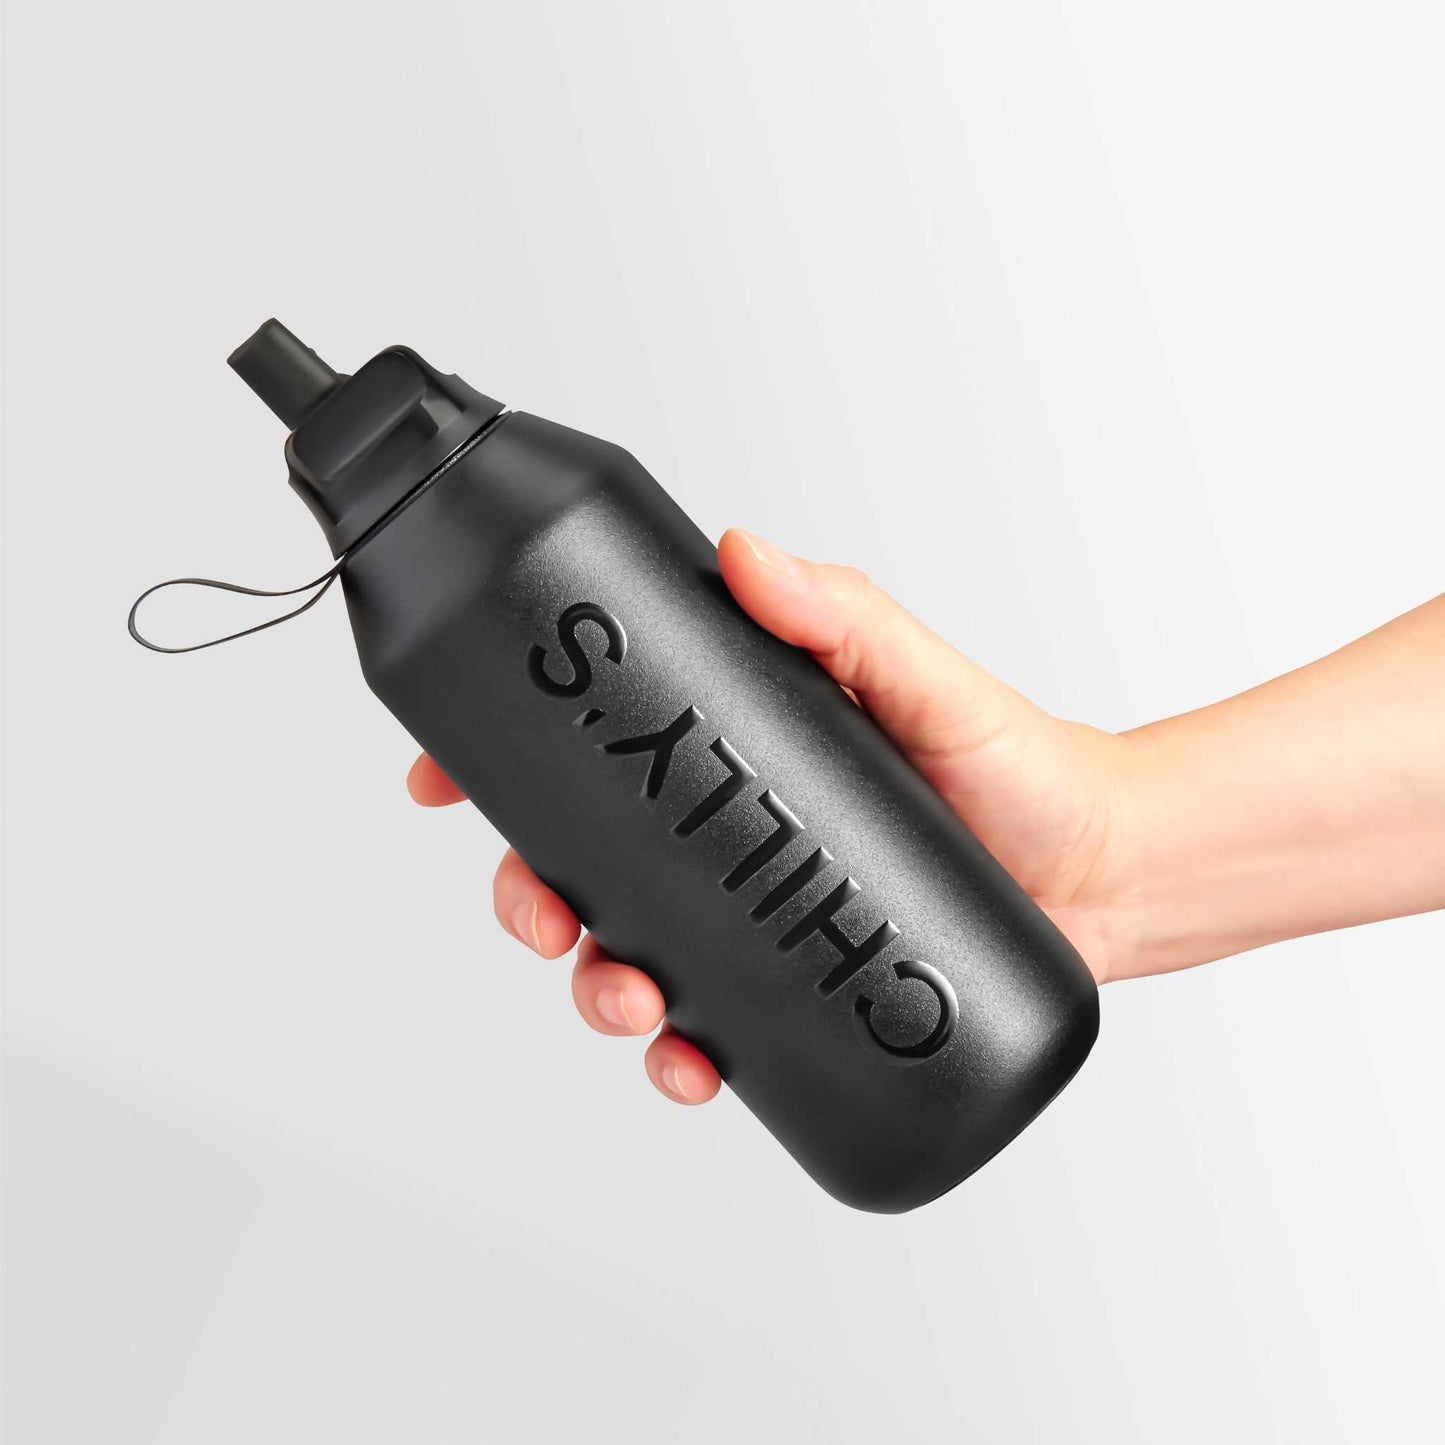 Chilly's Series 2 Insulated Leak-Proof Drinks Bottle, 1L, Black